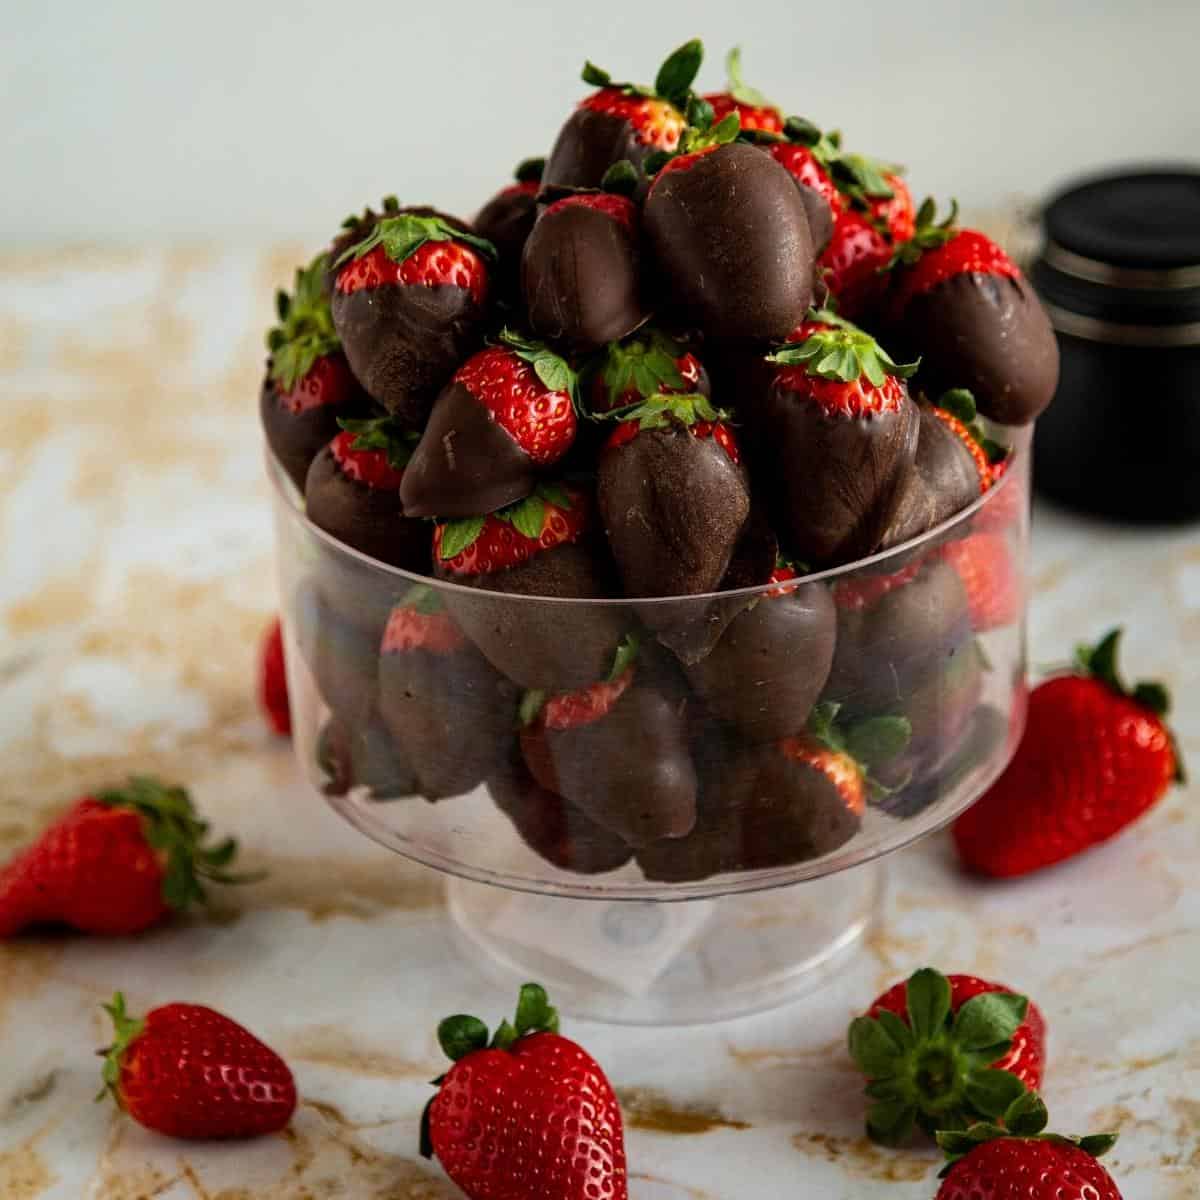 A bowl with strawberries for Valentine's Day.